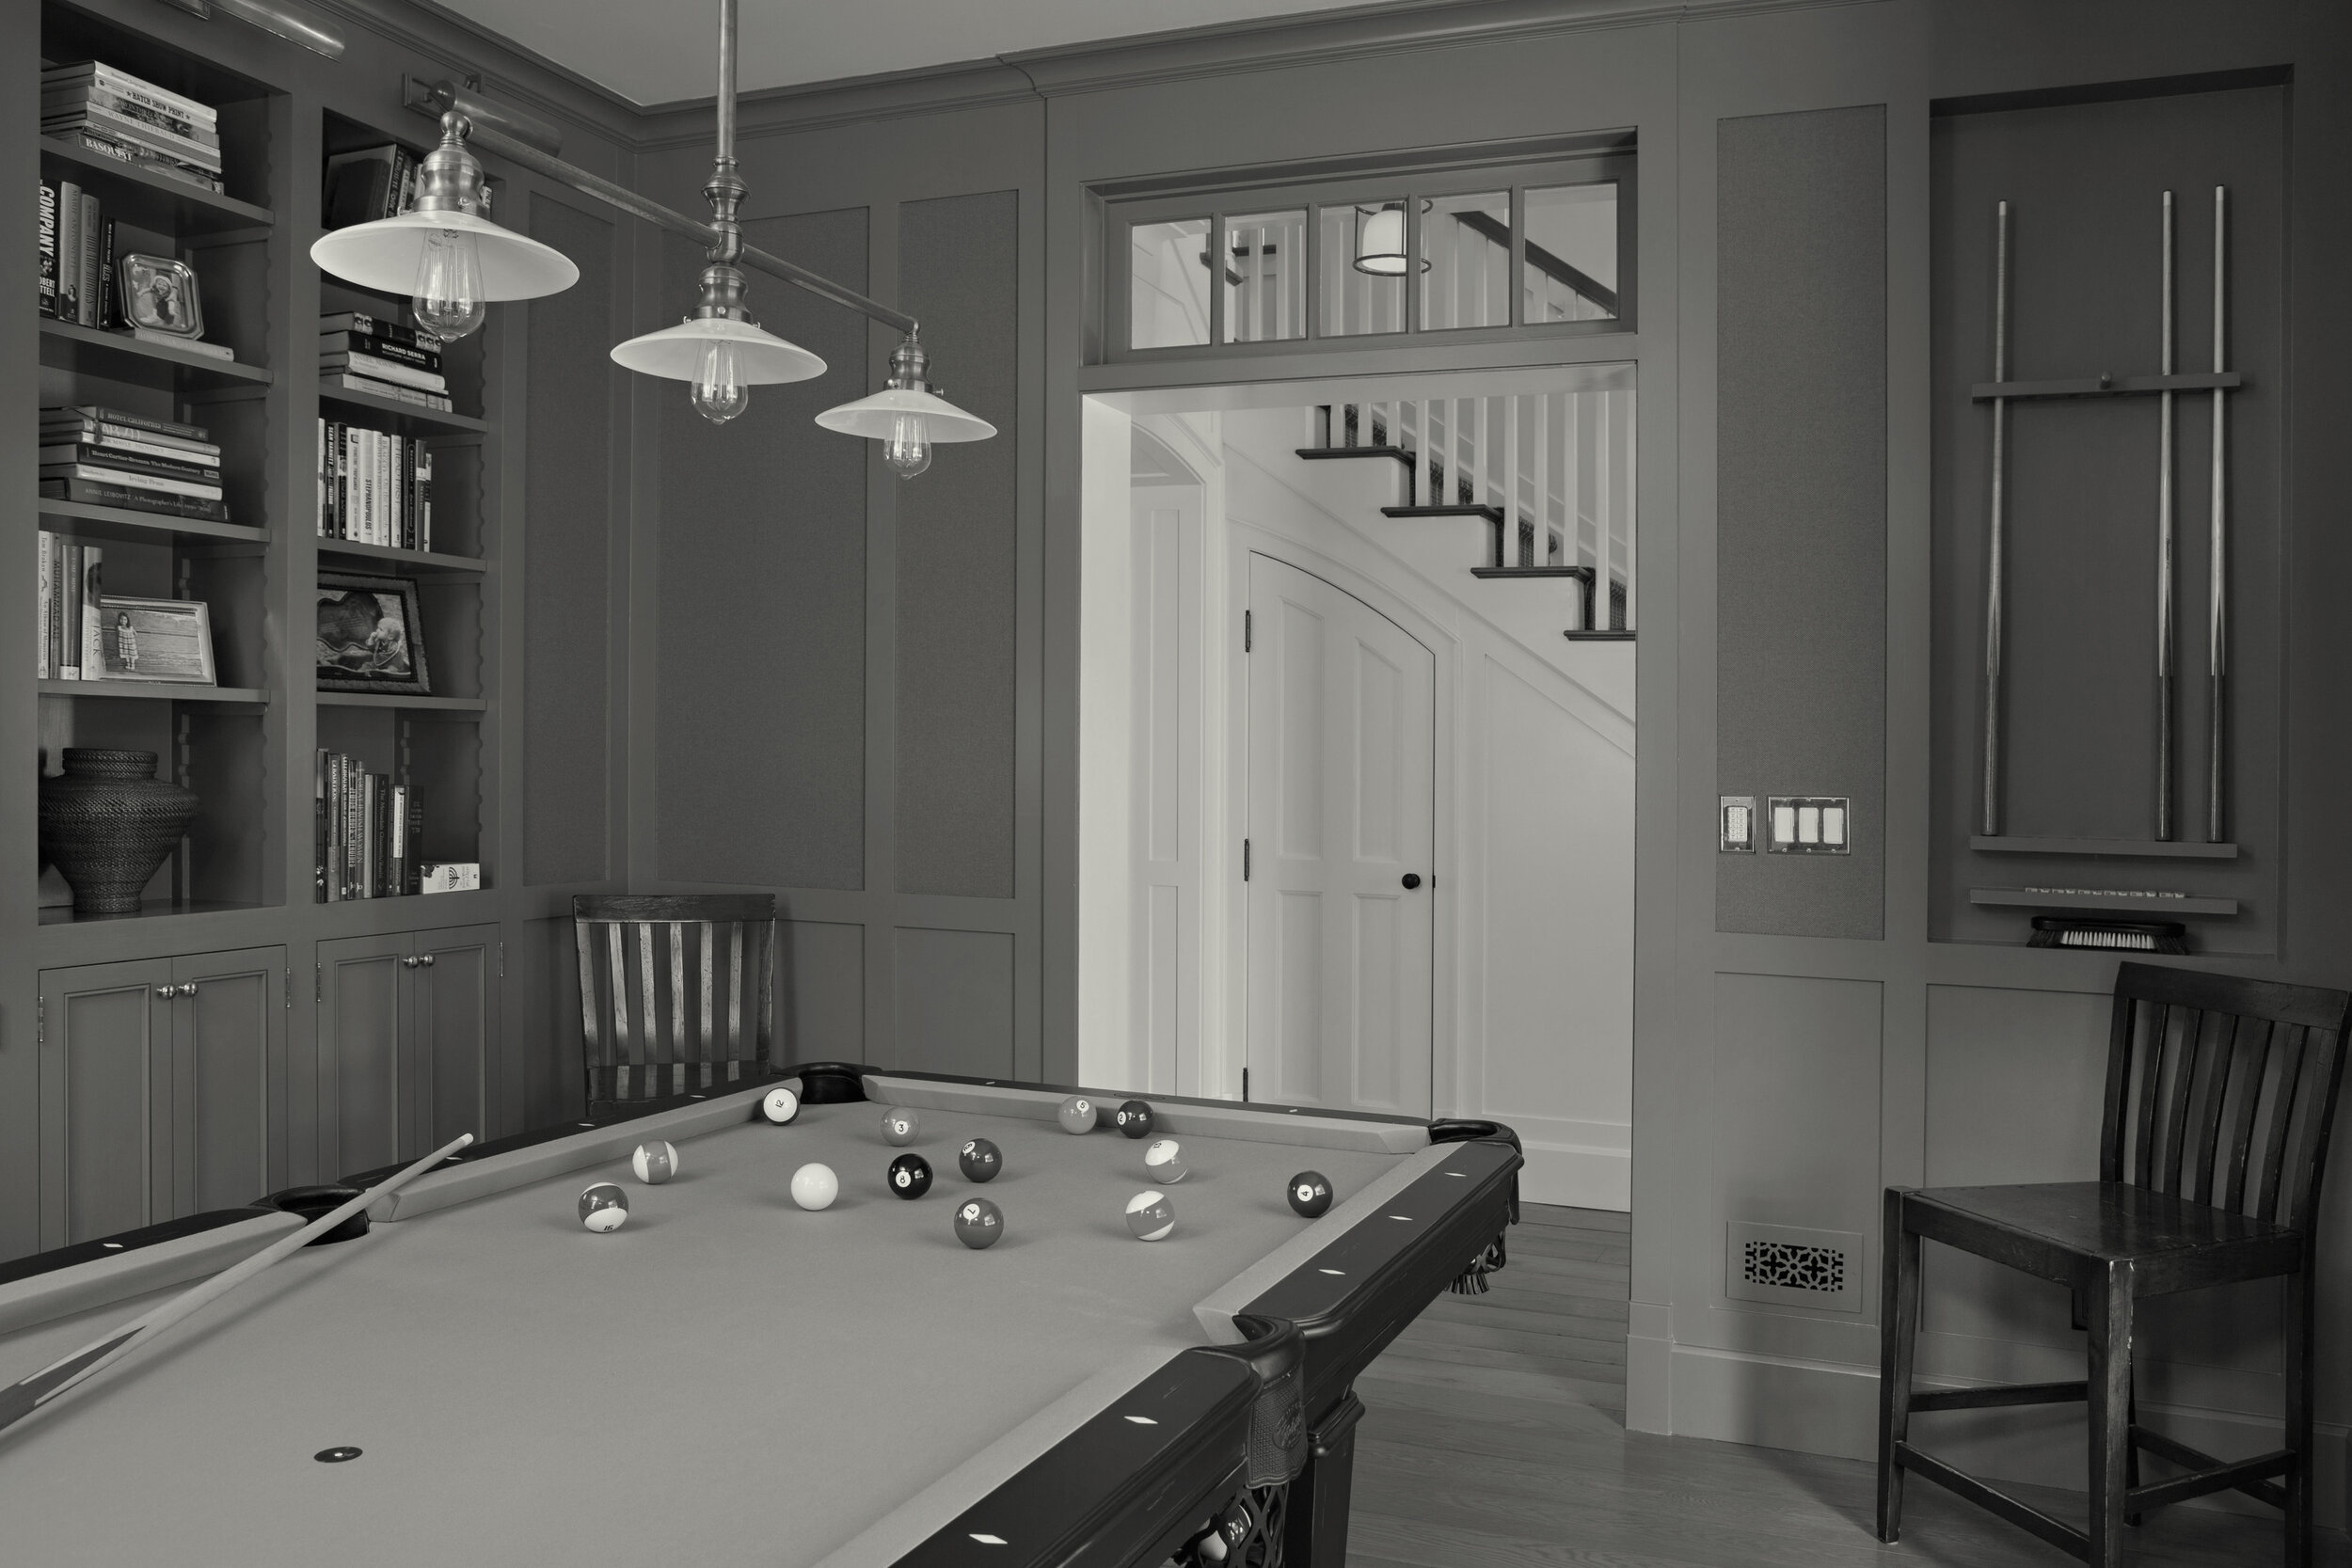 Xavier_Beltran_Architecture_Los Angeles_Traditional LEED Gold Residence_Shingle Style_Studio City_New Construction_Sustainable_Billiard Room_multiply.jpg